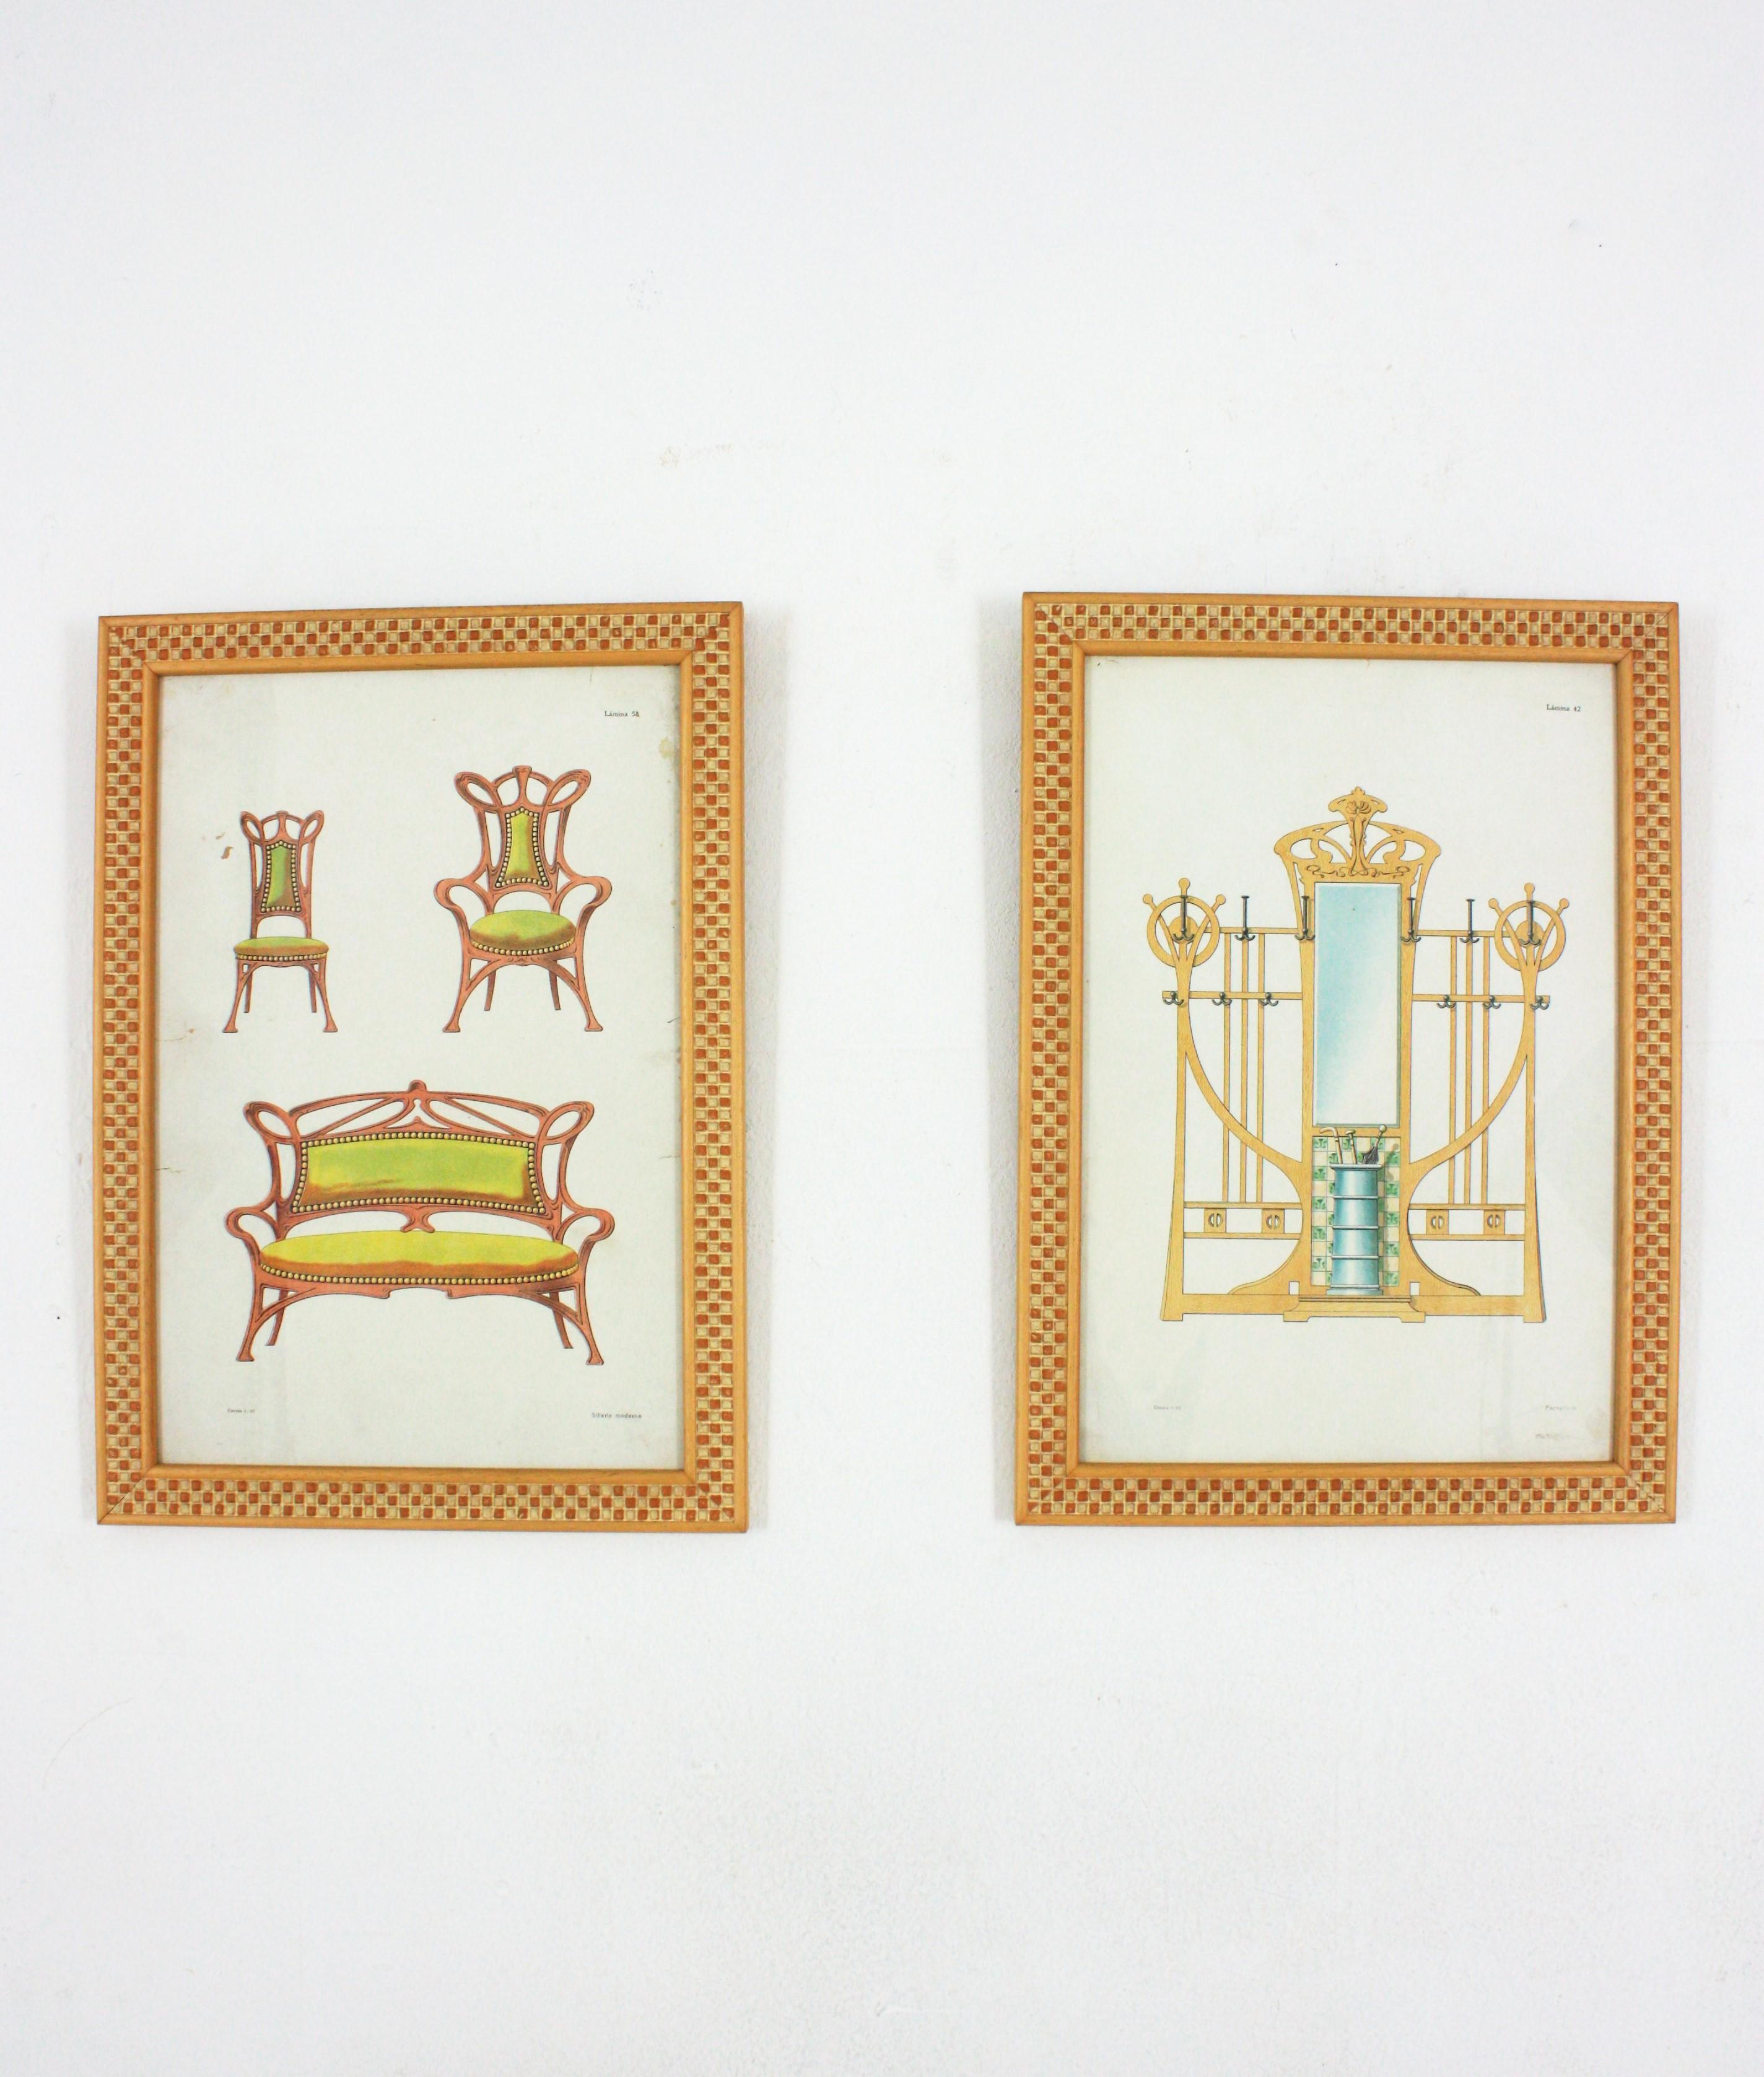 Unmatching pair of framed prints representing Art Nouveau furniture. Spain, 1920s-1930s
Newly framed arround 20 years ago.
Measures: 47 cm H x 33.5 cm W x 2 cm D (including the frame).
 